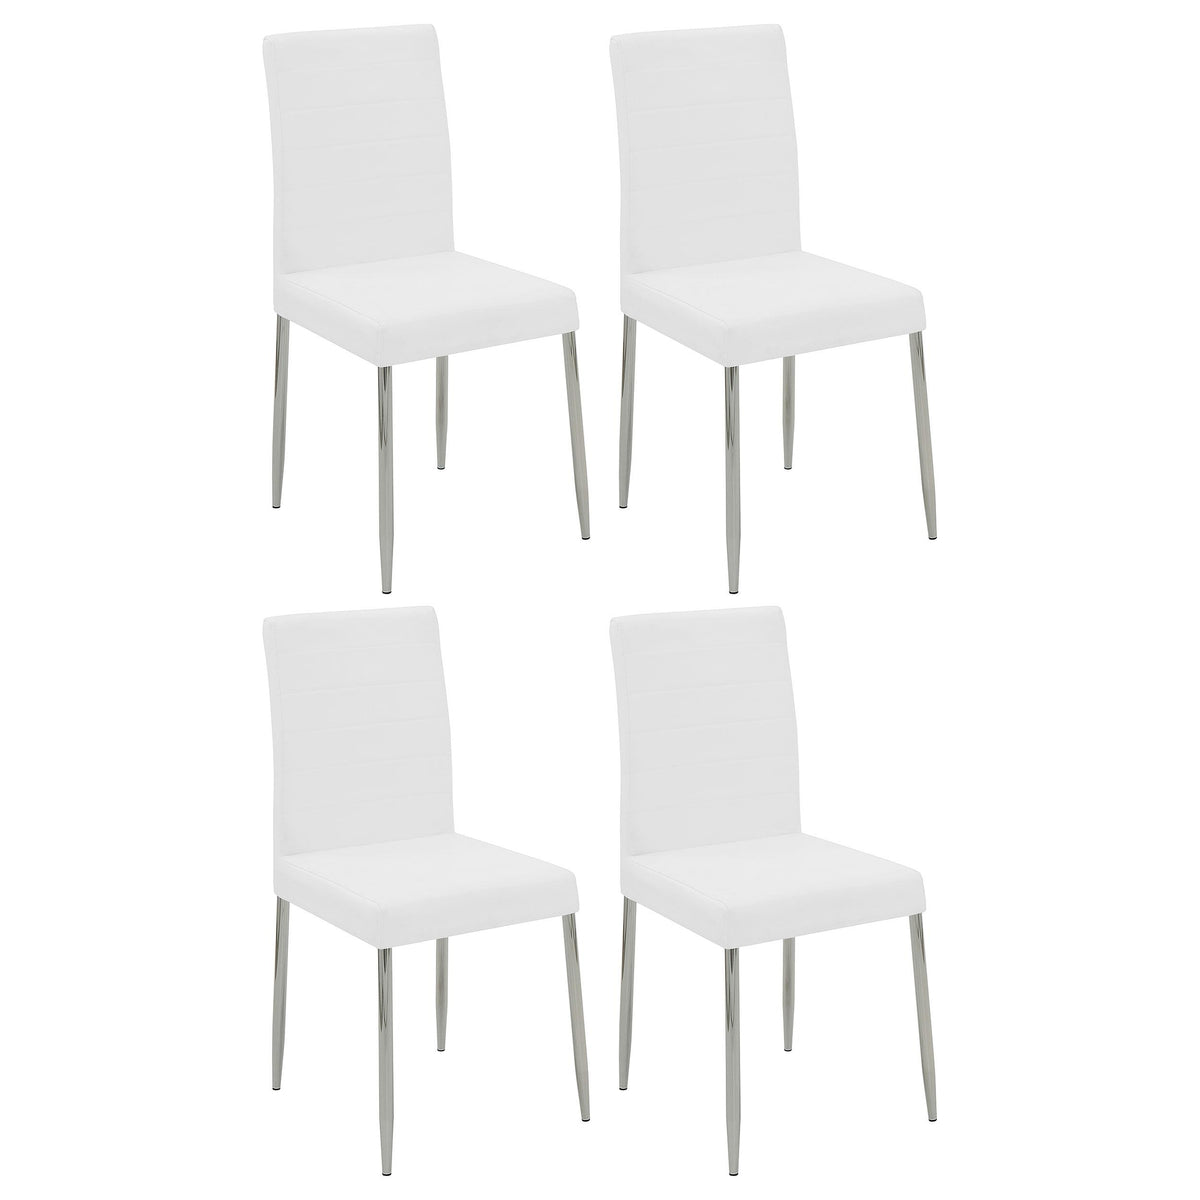 Maston Upholstered Dining Chairs White (Set of 4) Maston Upholstered Dining Chairs White (Set of 4) Half Price Furniture